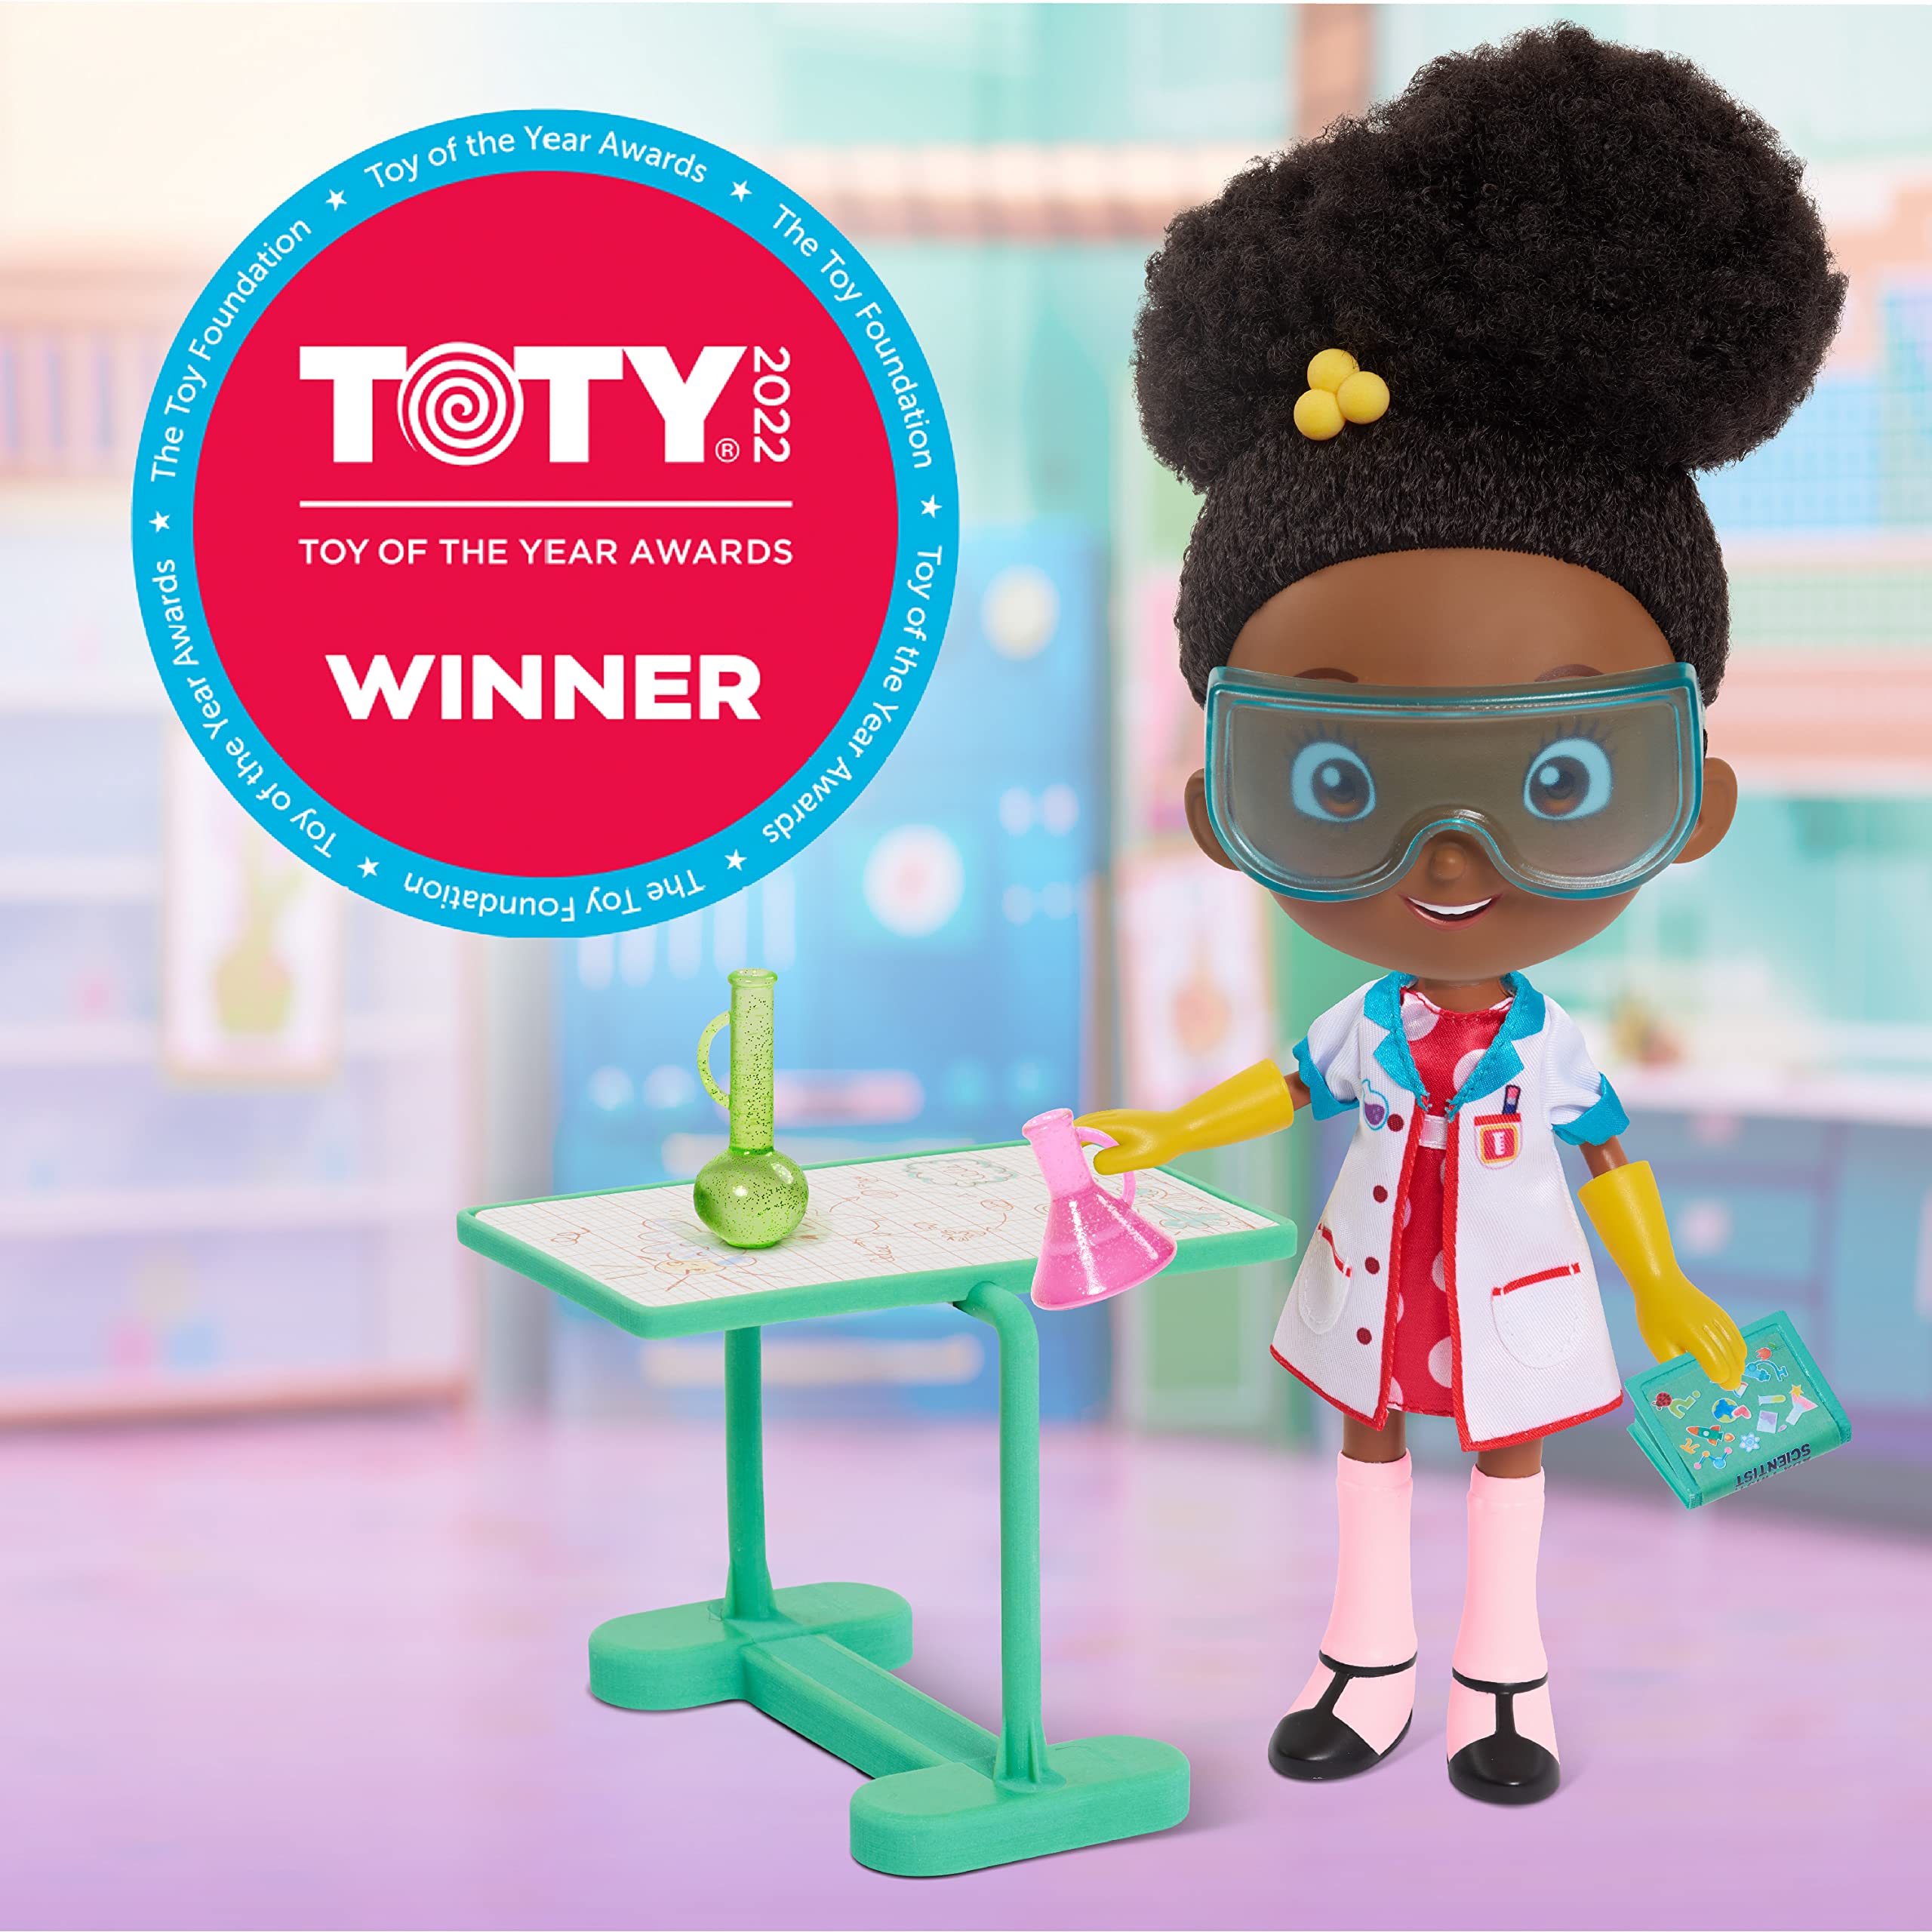 ADA TWIST, Scientist Lab Doll, 12.5 Inch Interactive Doll with Research Lab Accessories, Talks and Sings The The Brainstorm Song, Kids Toys for Ages 3 Up, Gifts and Presents by Just Play